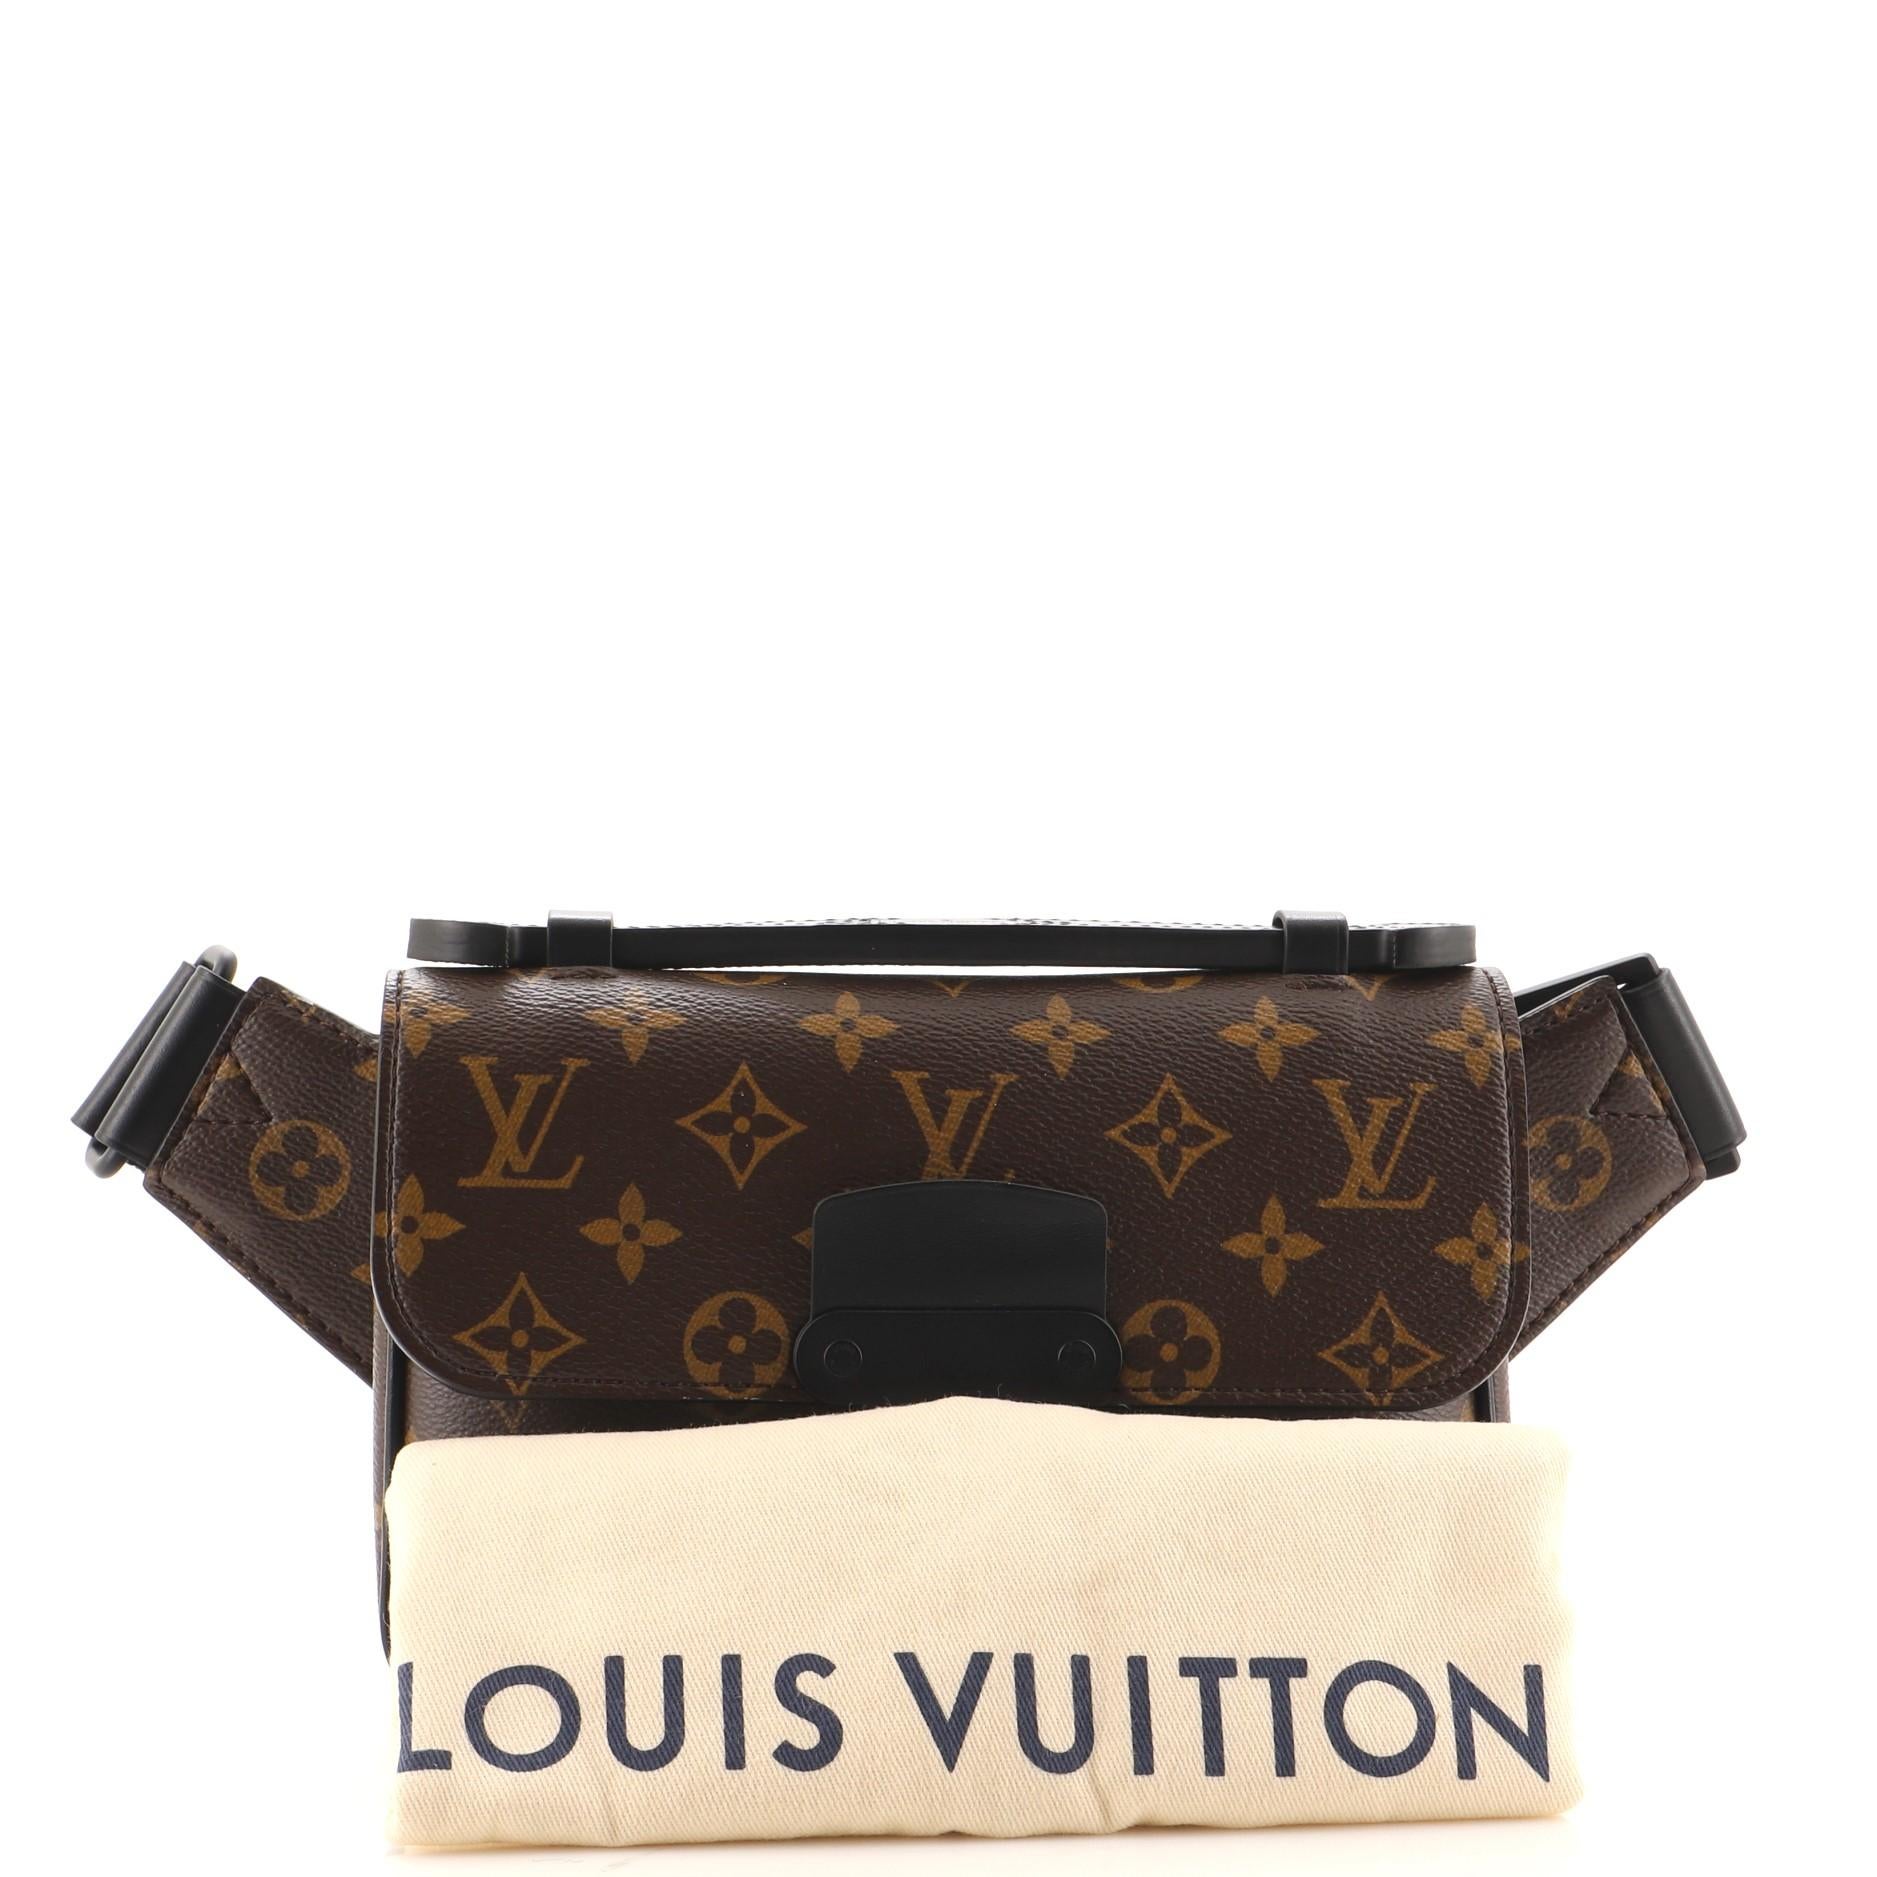 My first LV, Start of an obsession - S Lock Sling : r/Louisvuitton